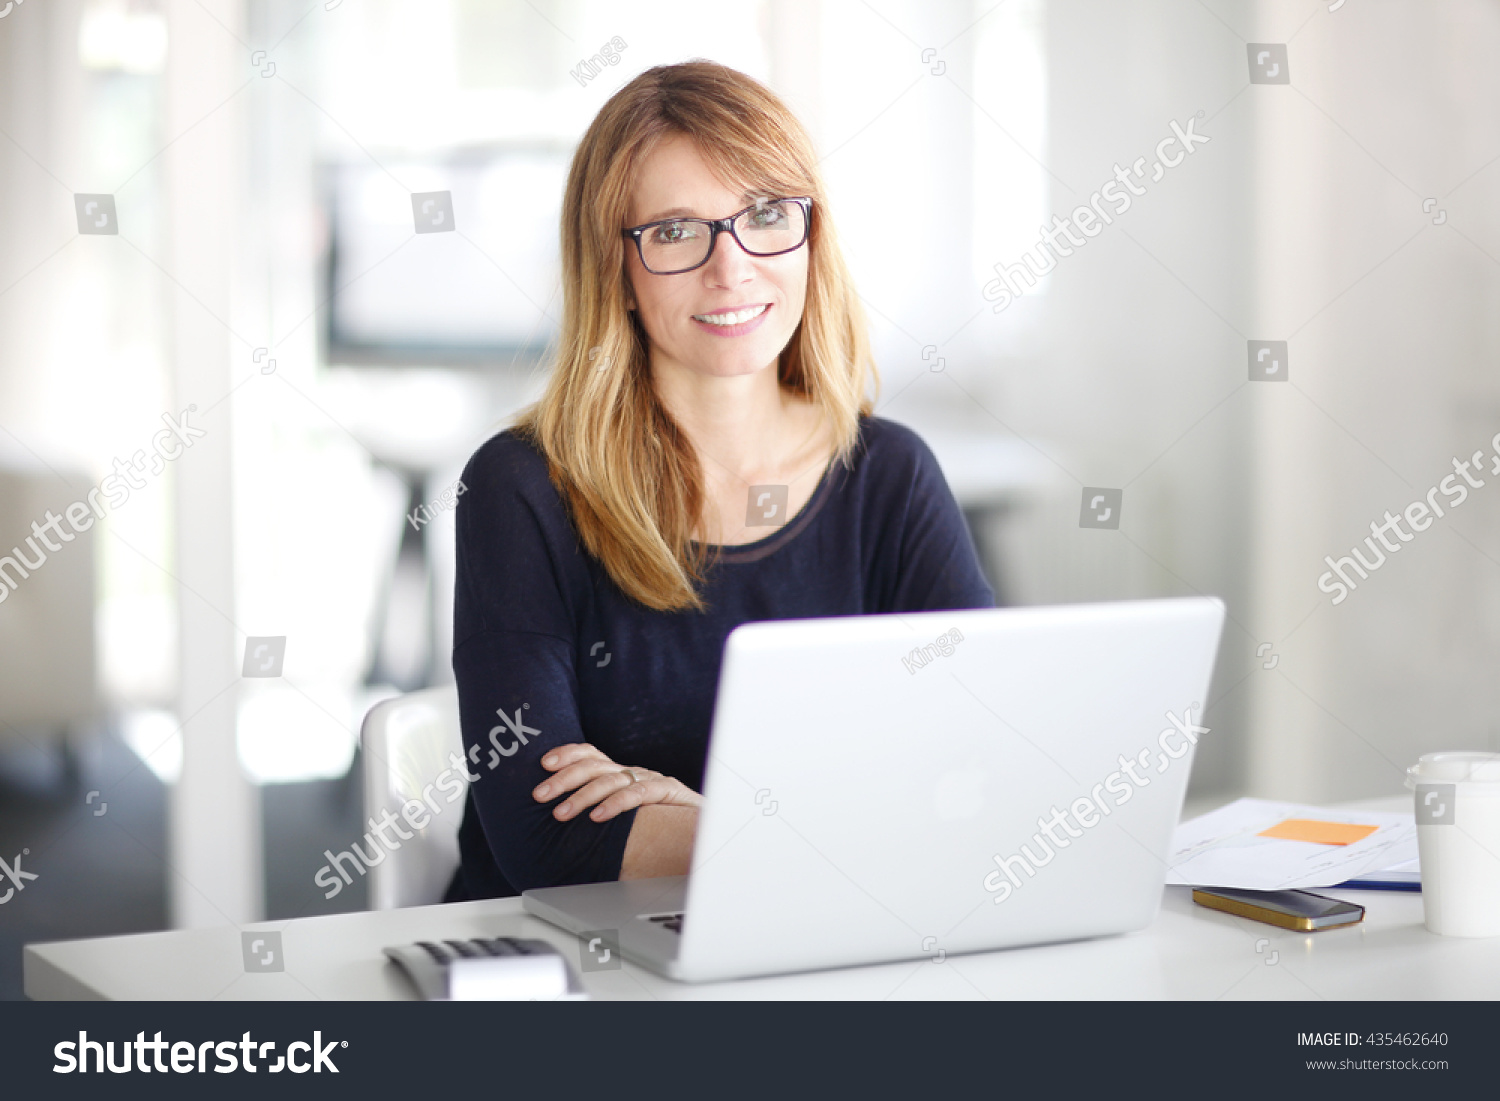 Portrait of an executive investment advisor professional woman sitting at office and working on laptop. #435462640